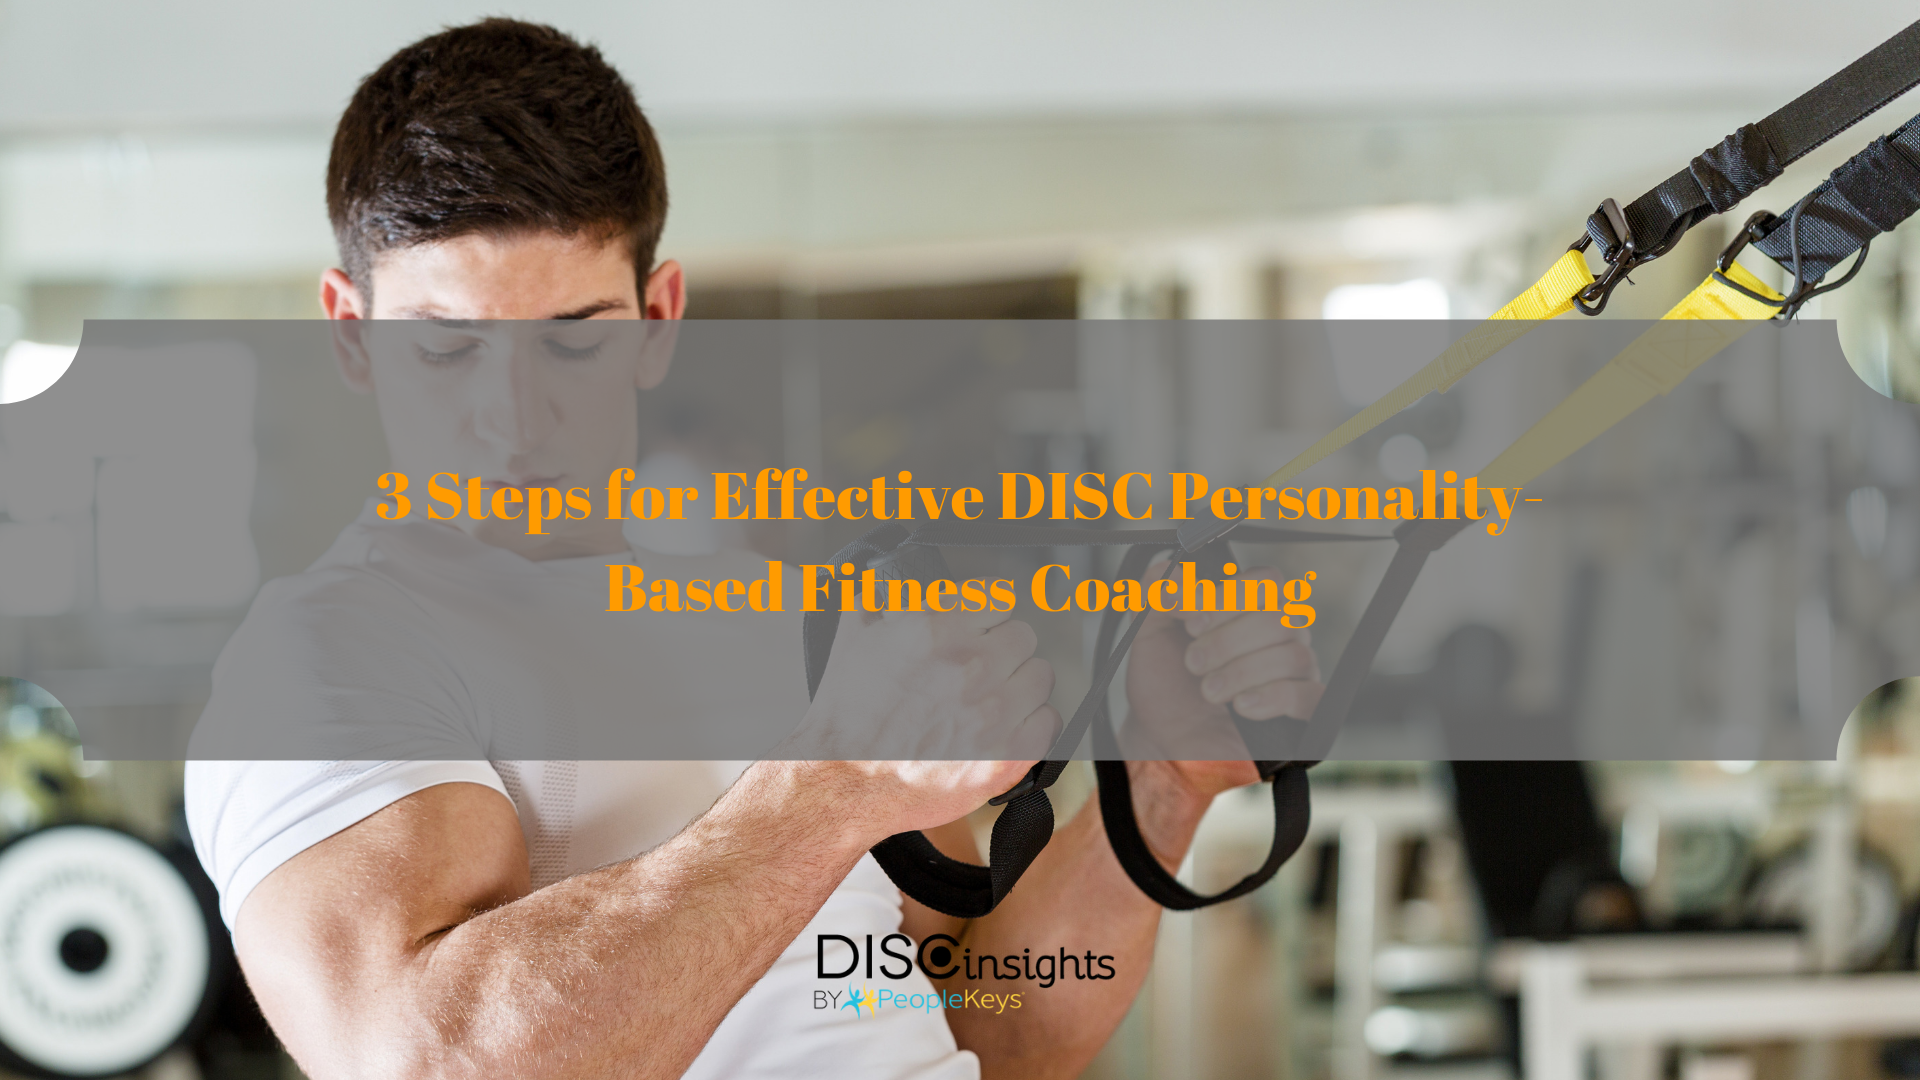 3 Steps for Effective DISC Personality-Based Fitness Coaching